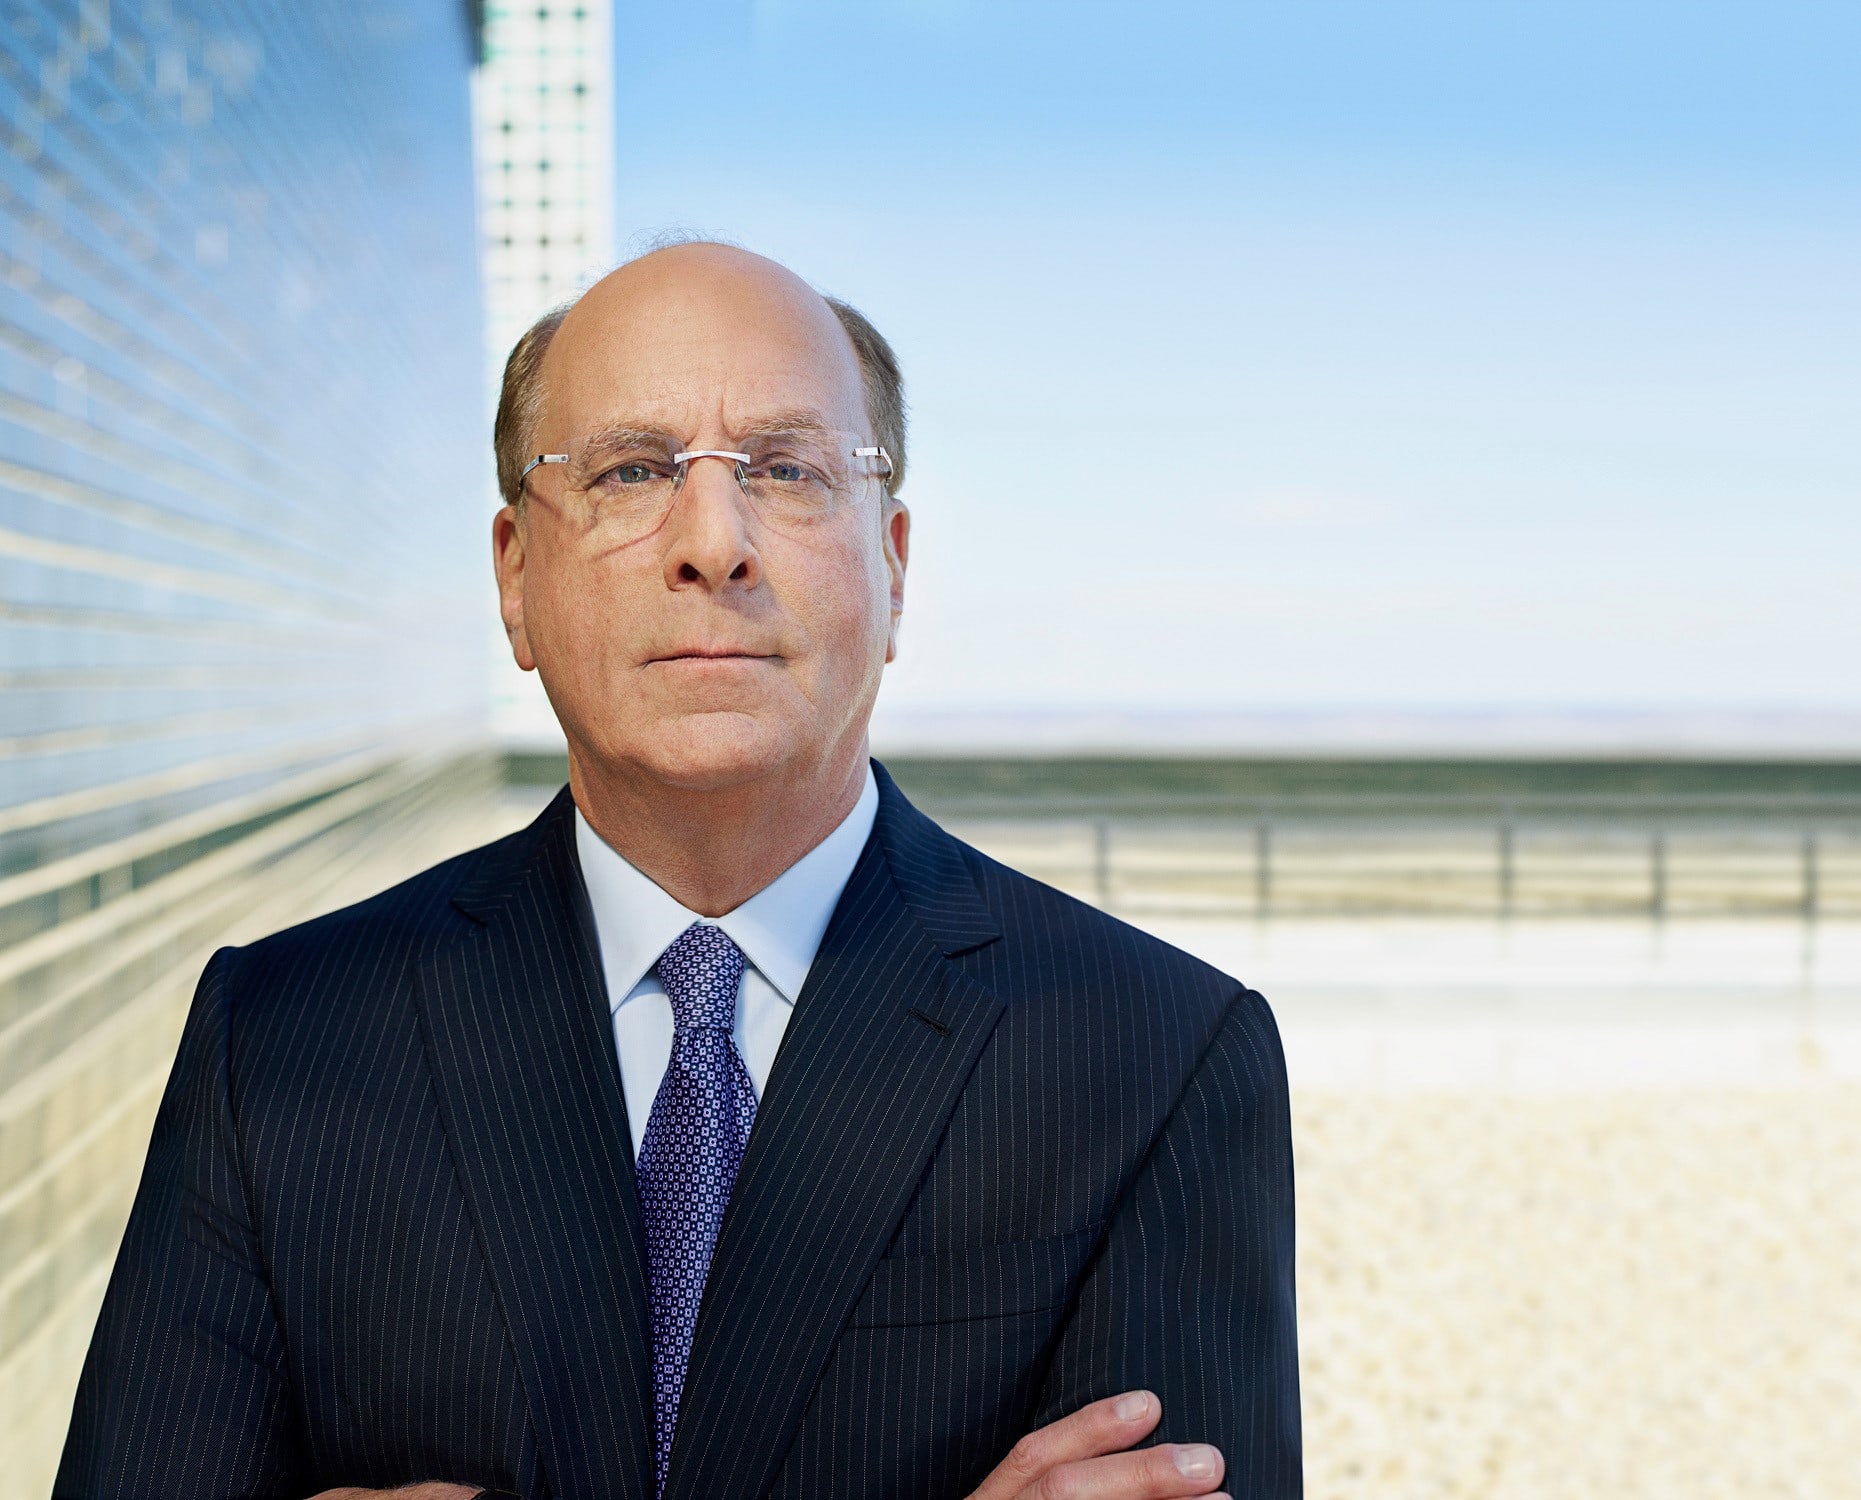 Larry Fink smiling and wearing a more informal grey suit without a tie.